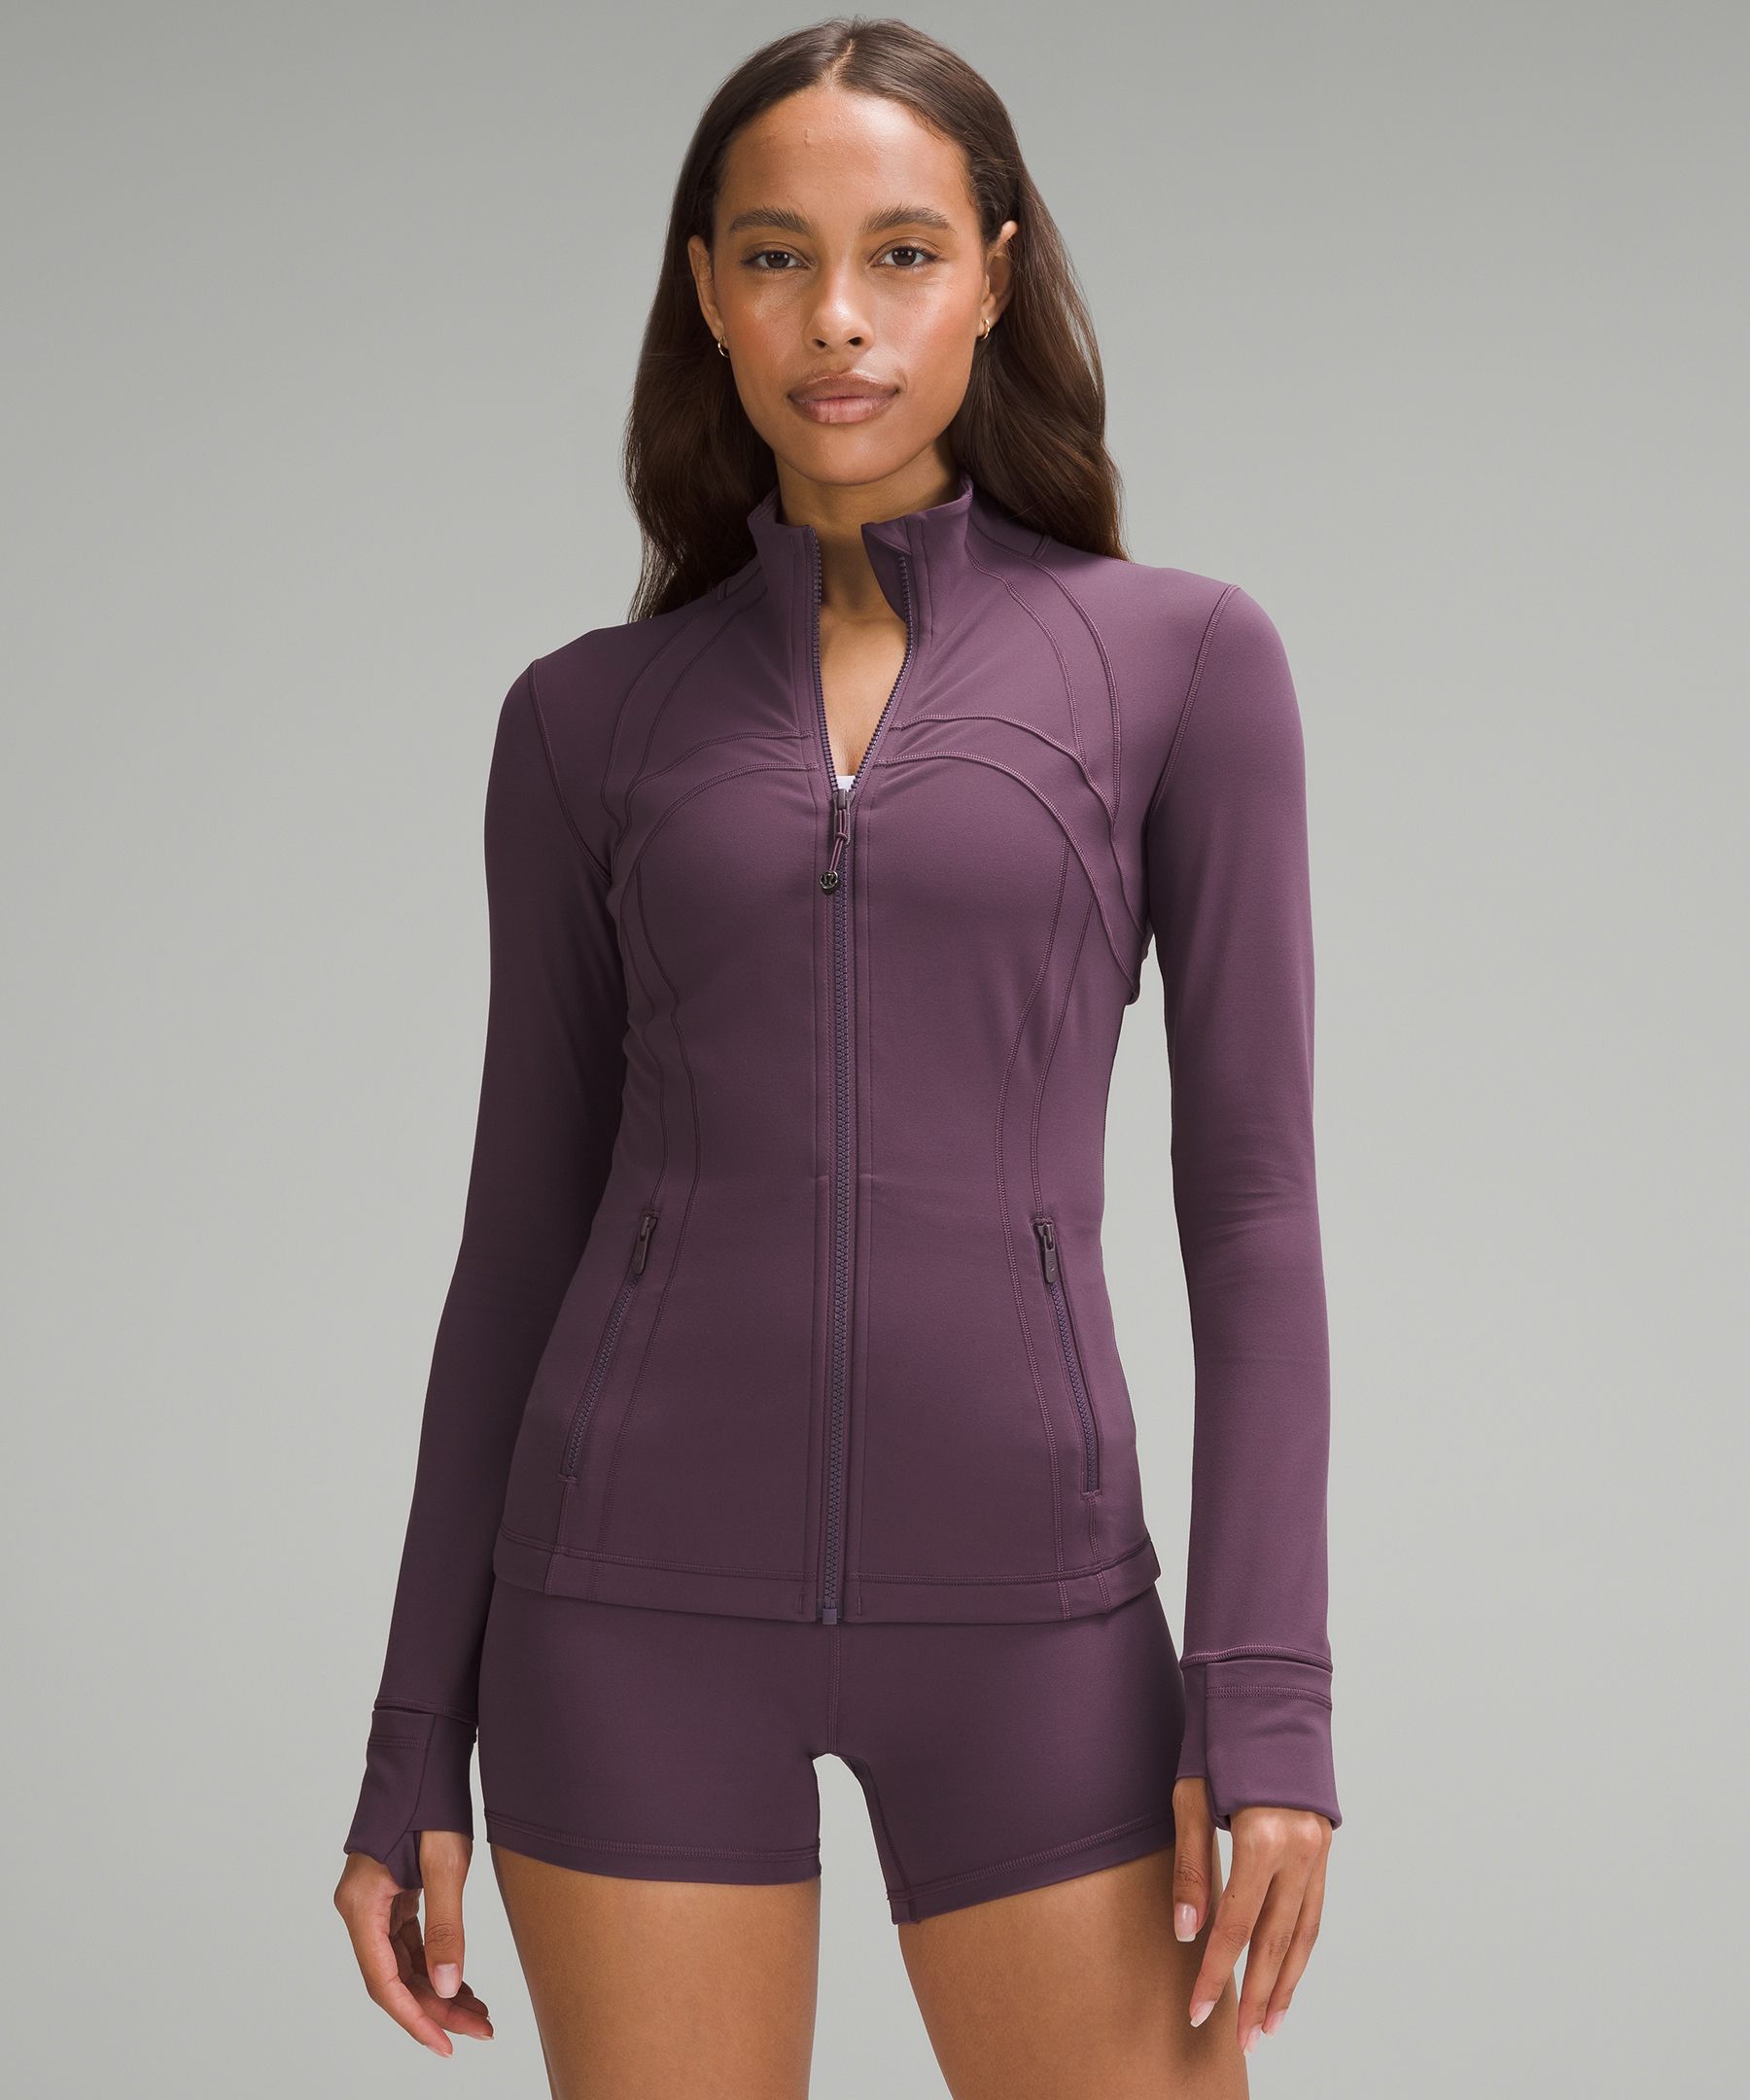 Best lululemon Products For Women